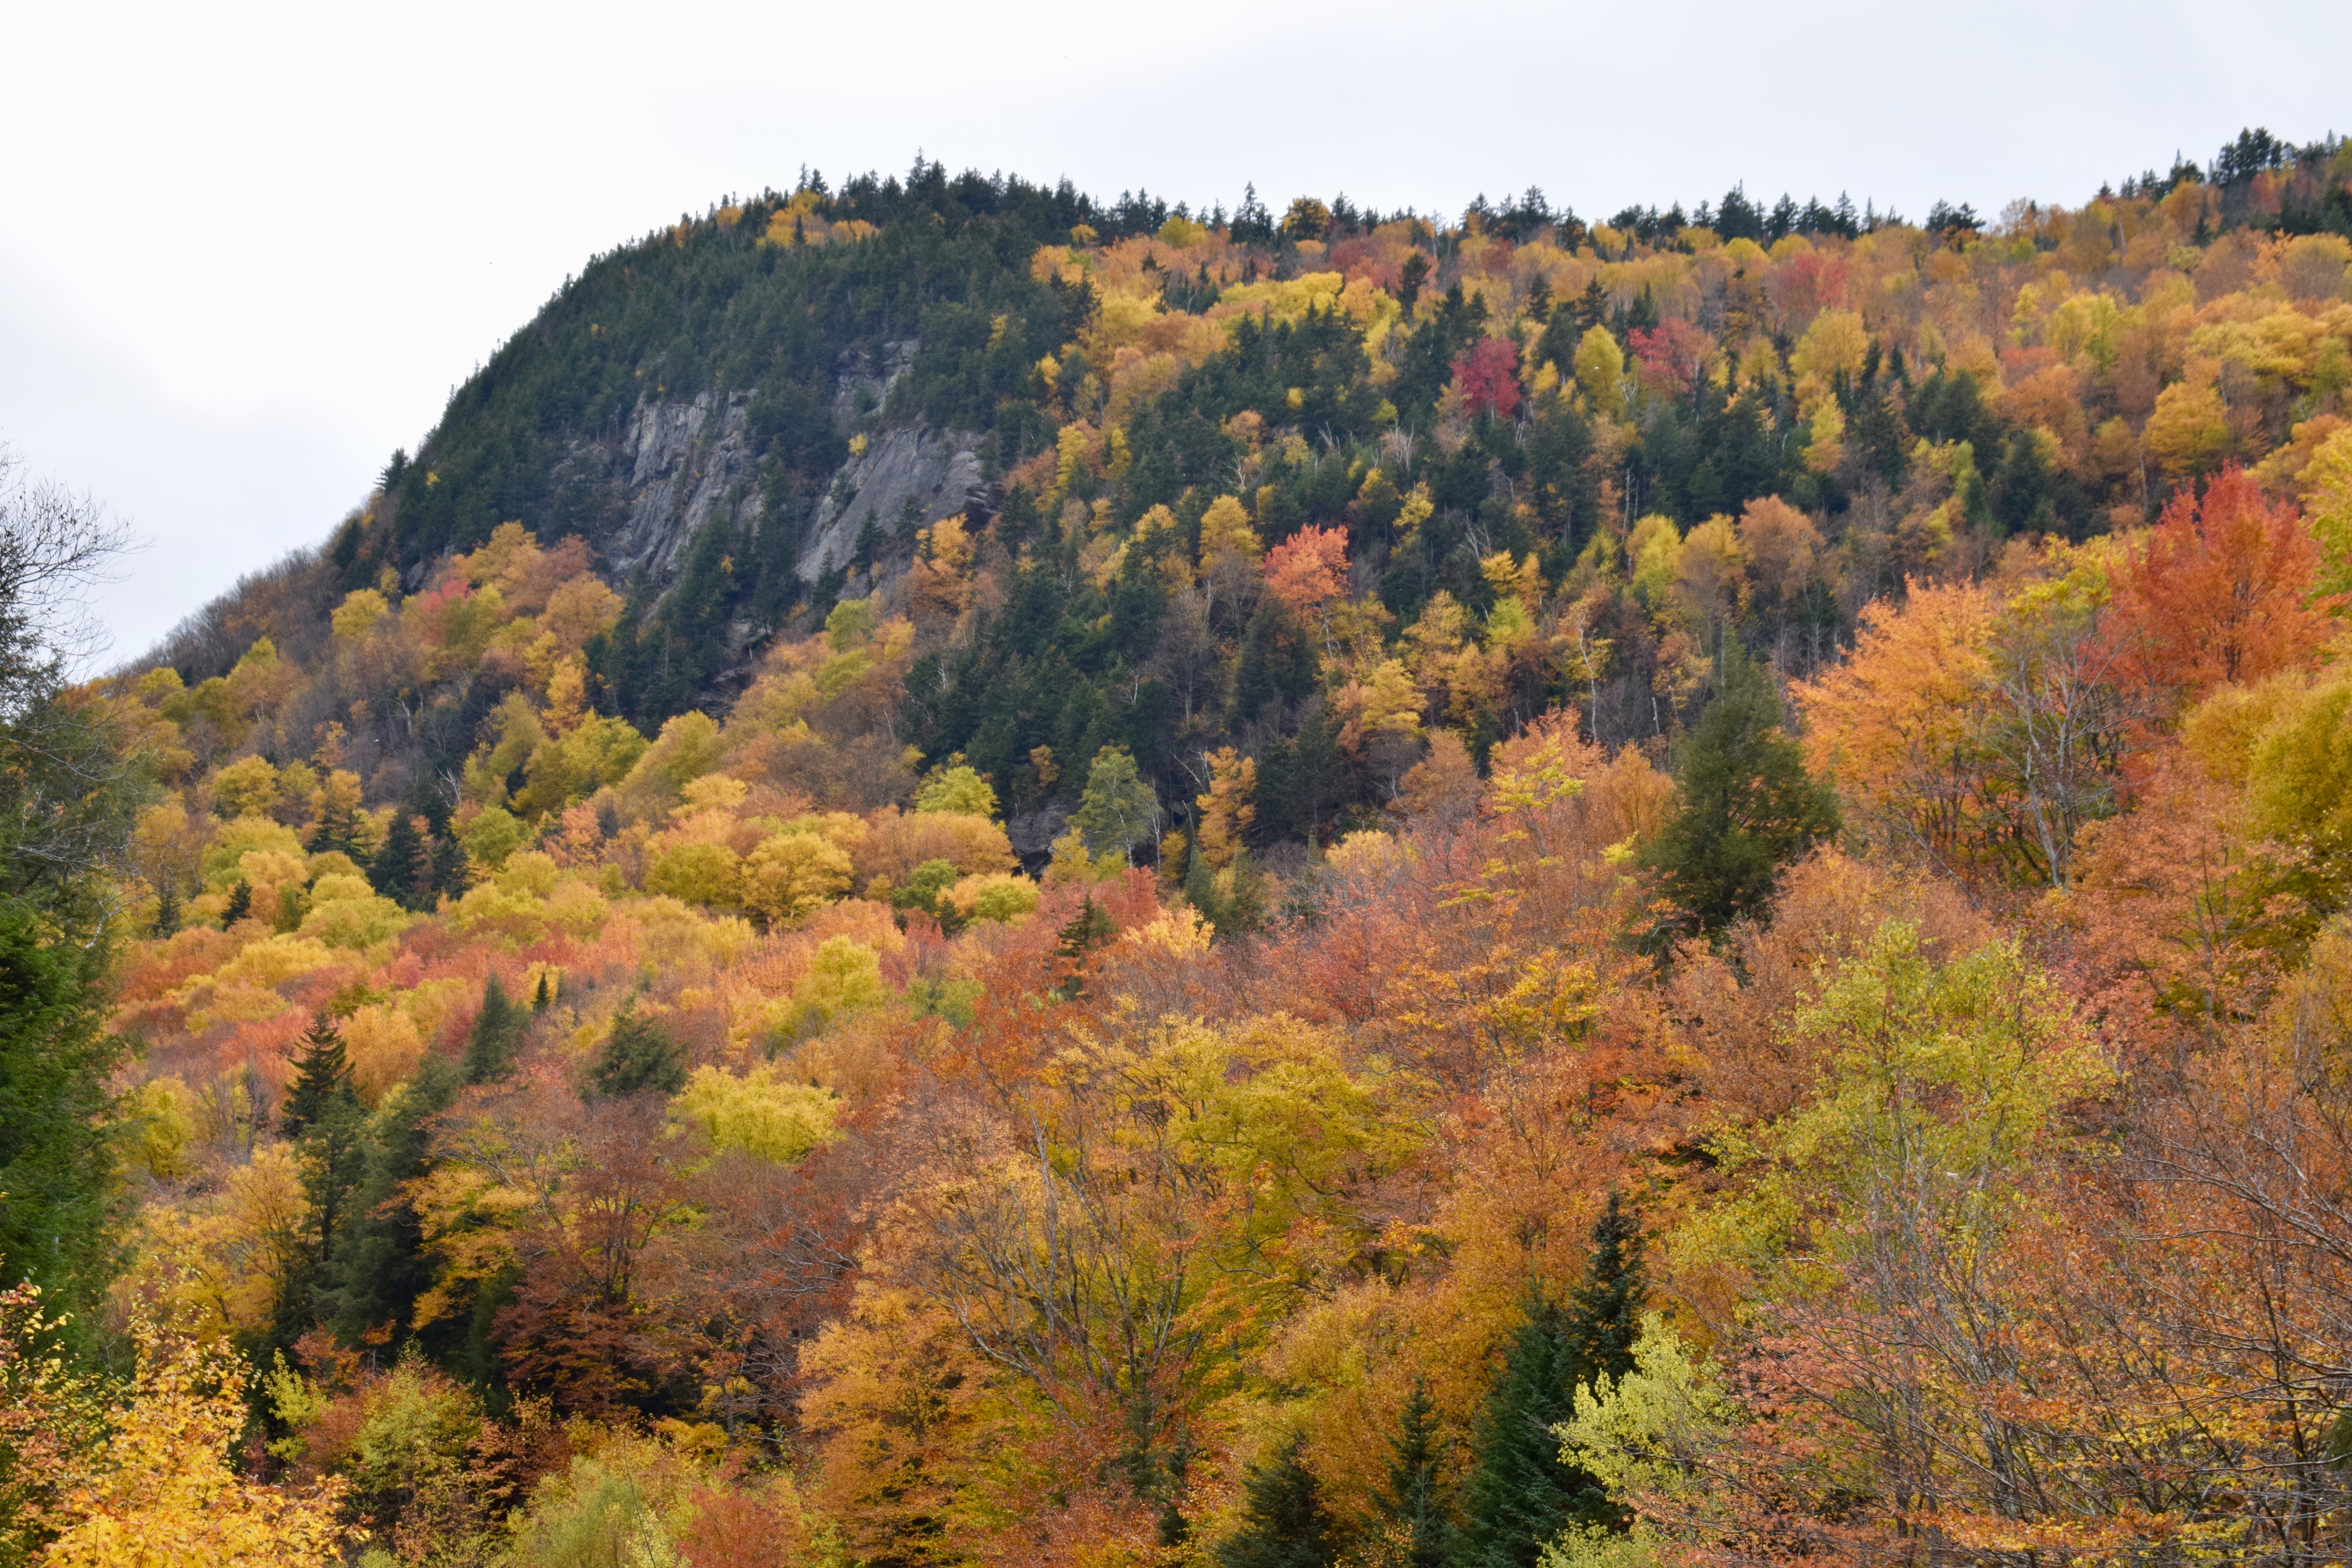 It's the weekend! Number 125, Fall Foliage on a NH Mountain